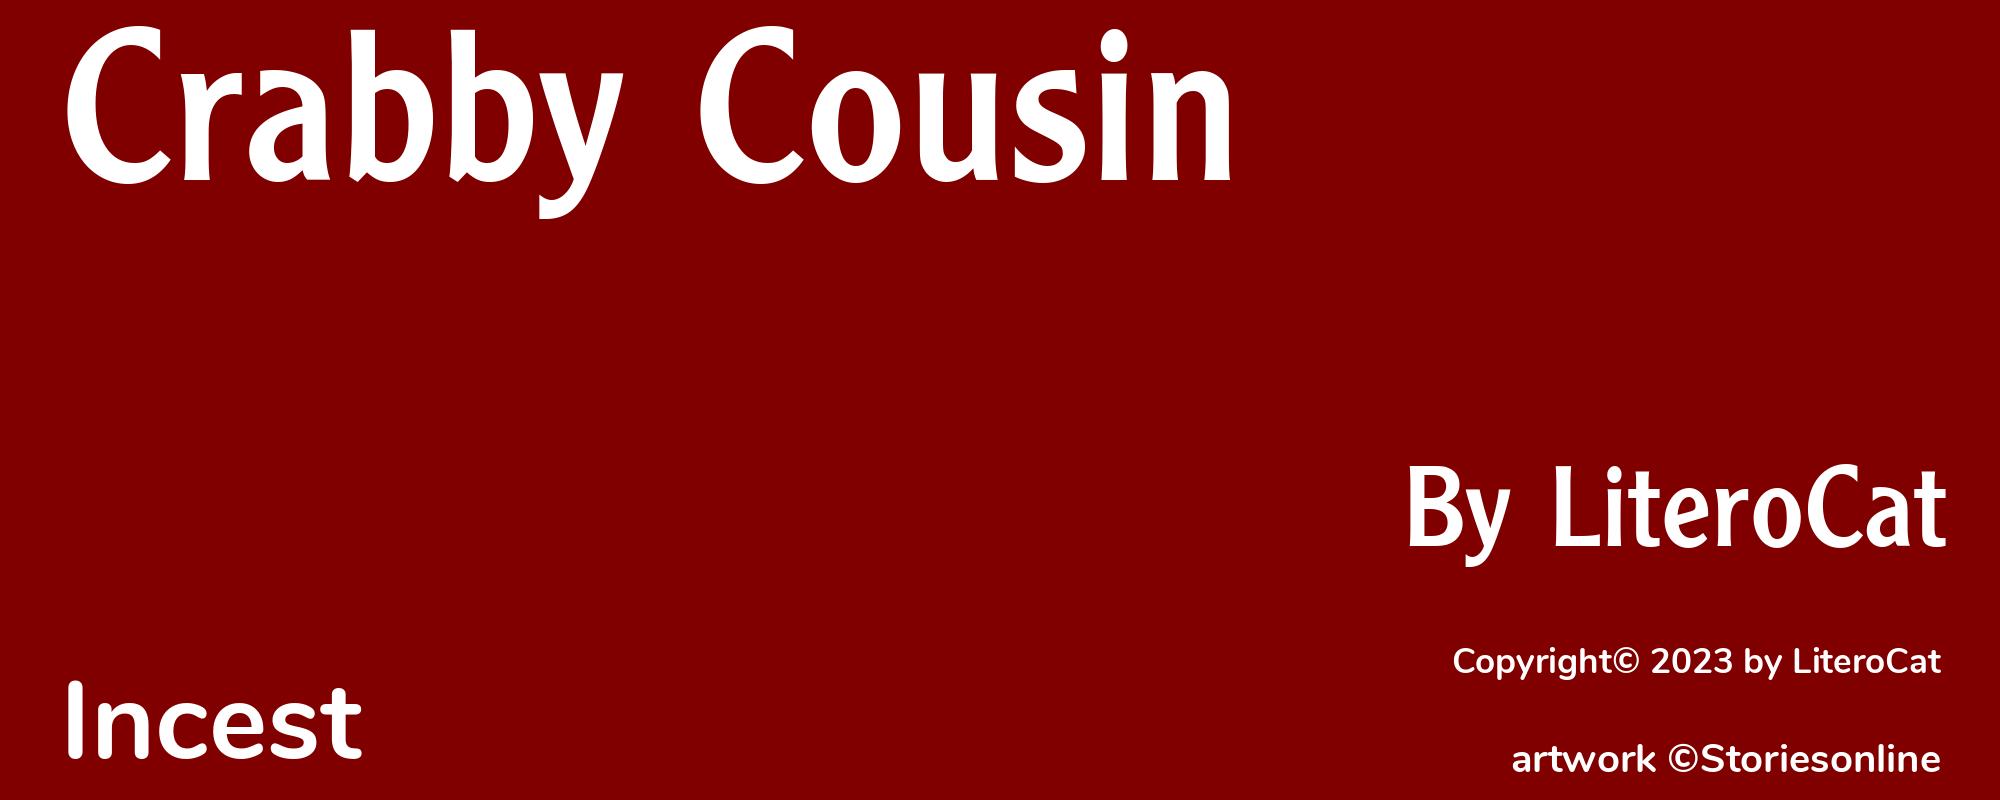 Crabby Cousin - Cover